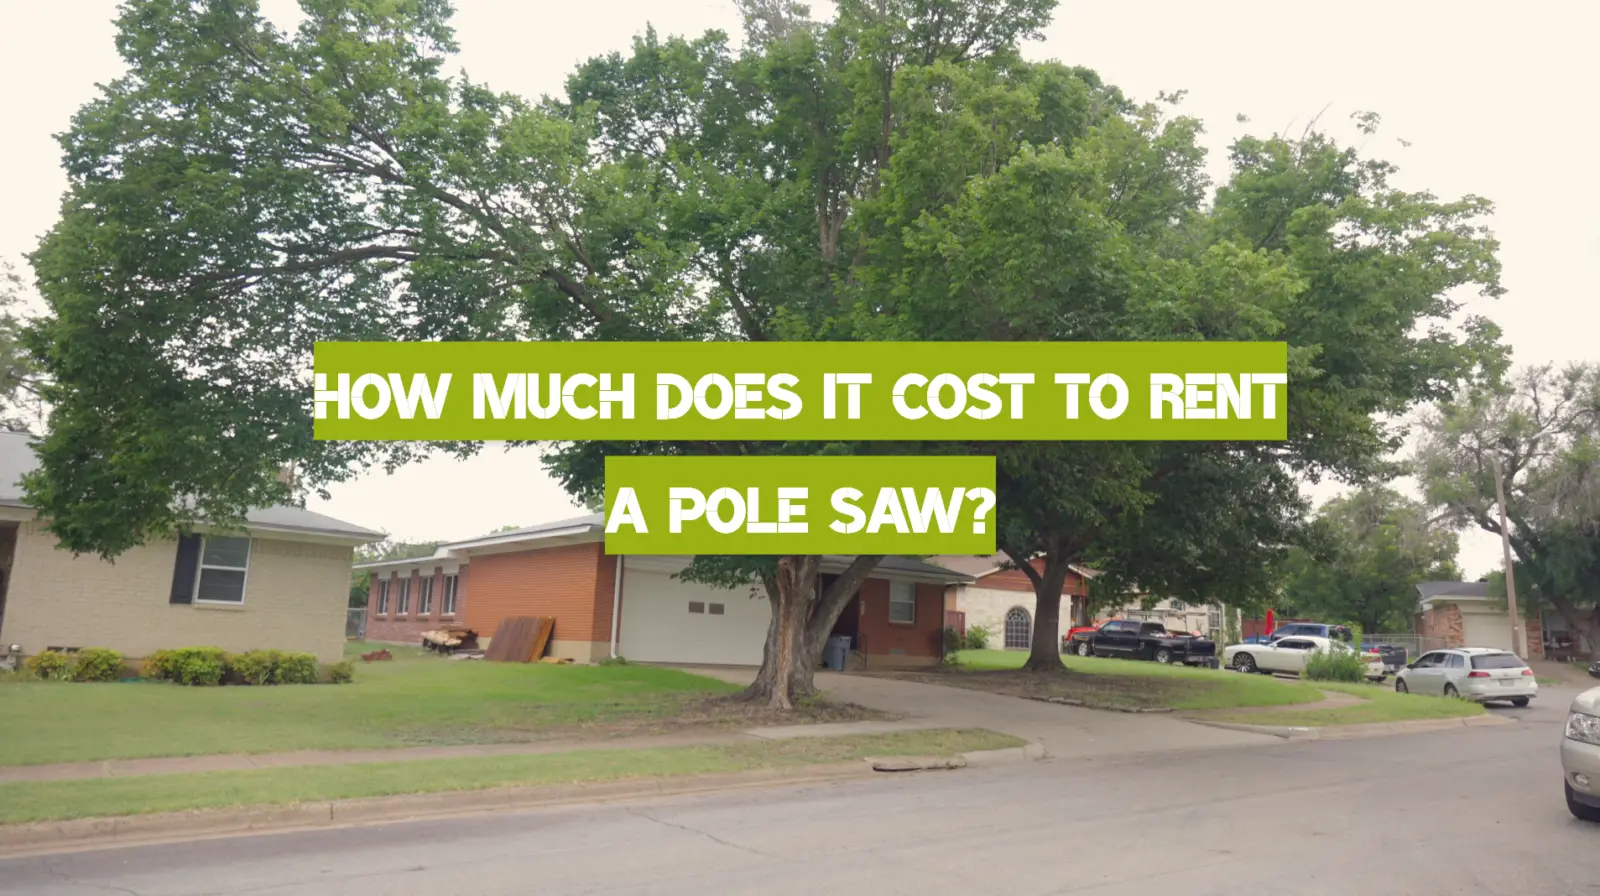 How Much Does It Cost to Rent a Pole Saw?